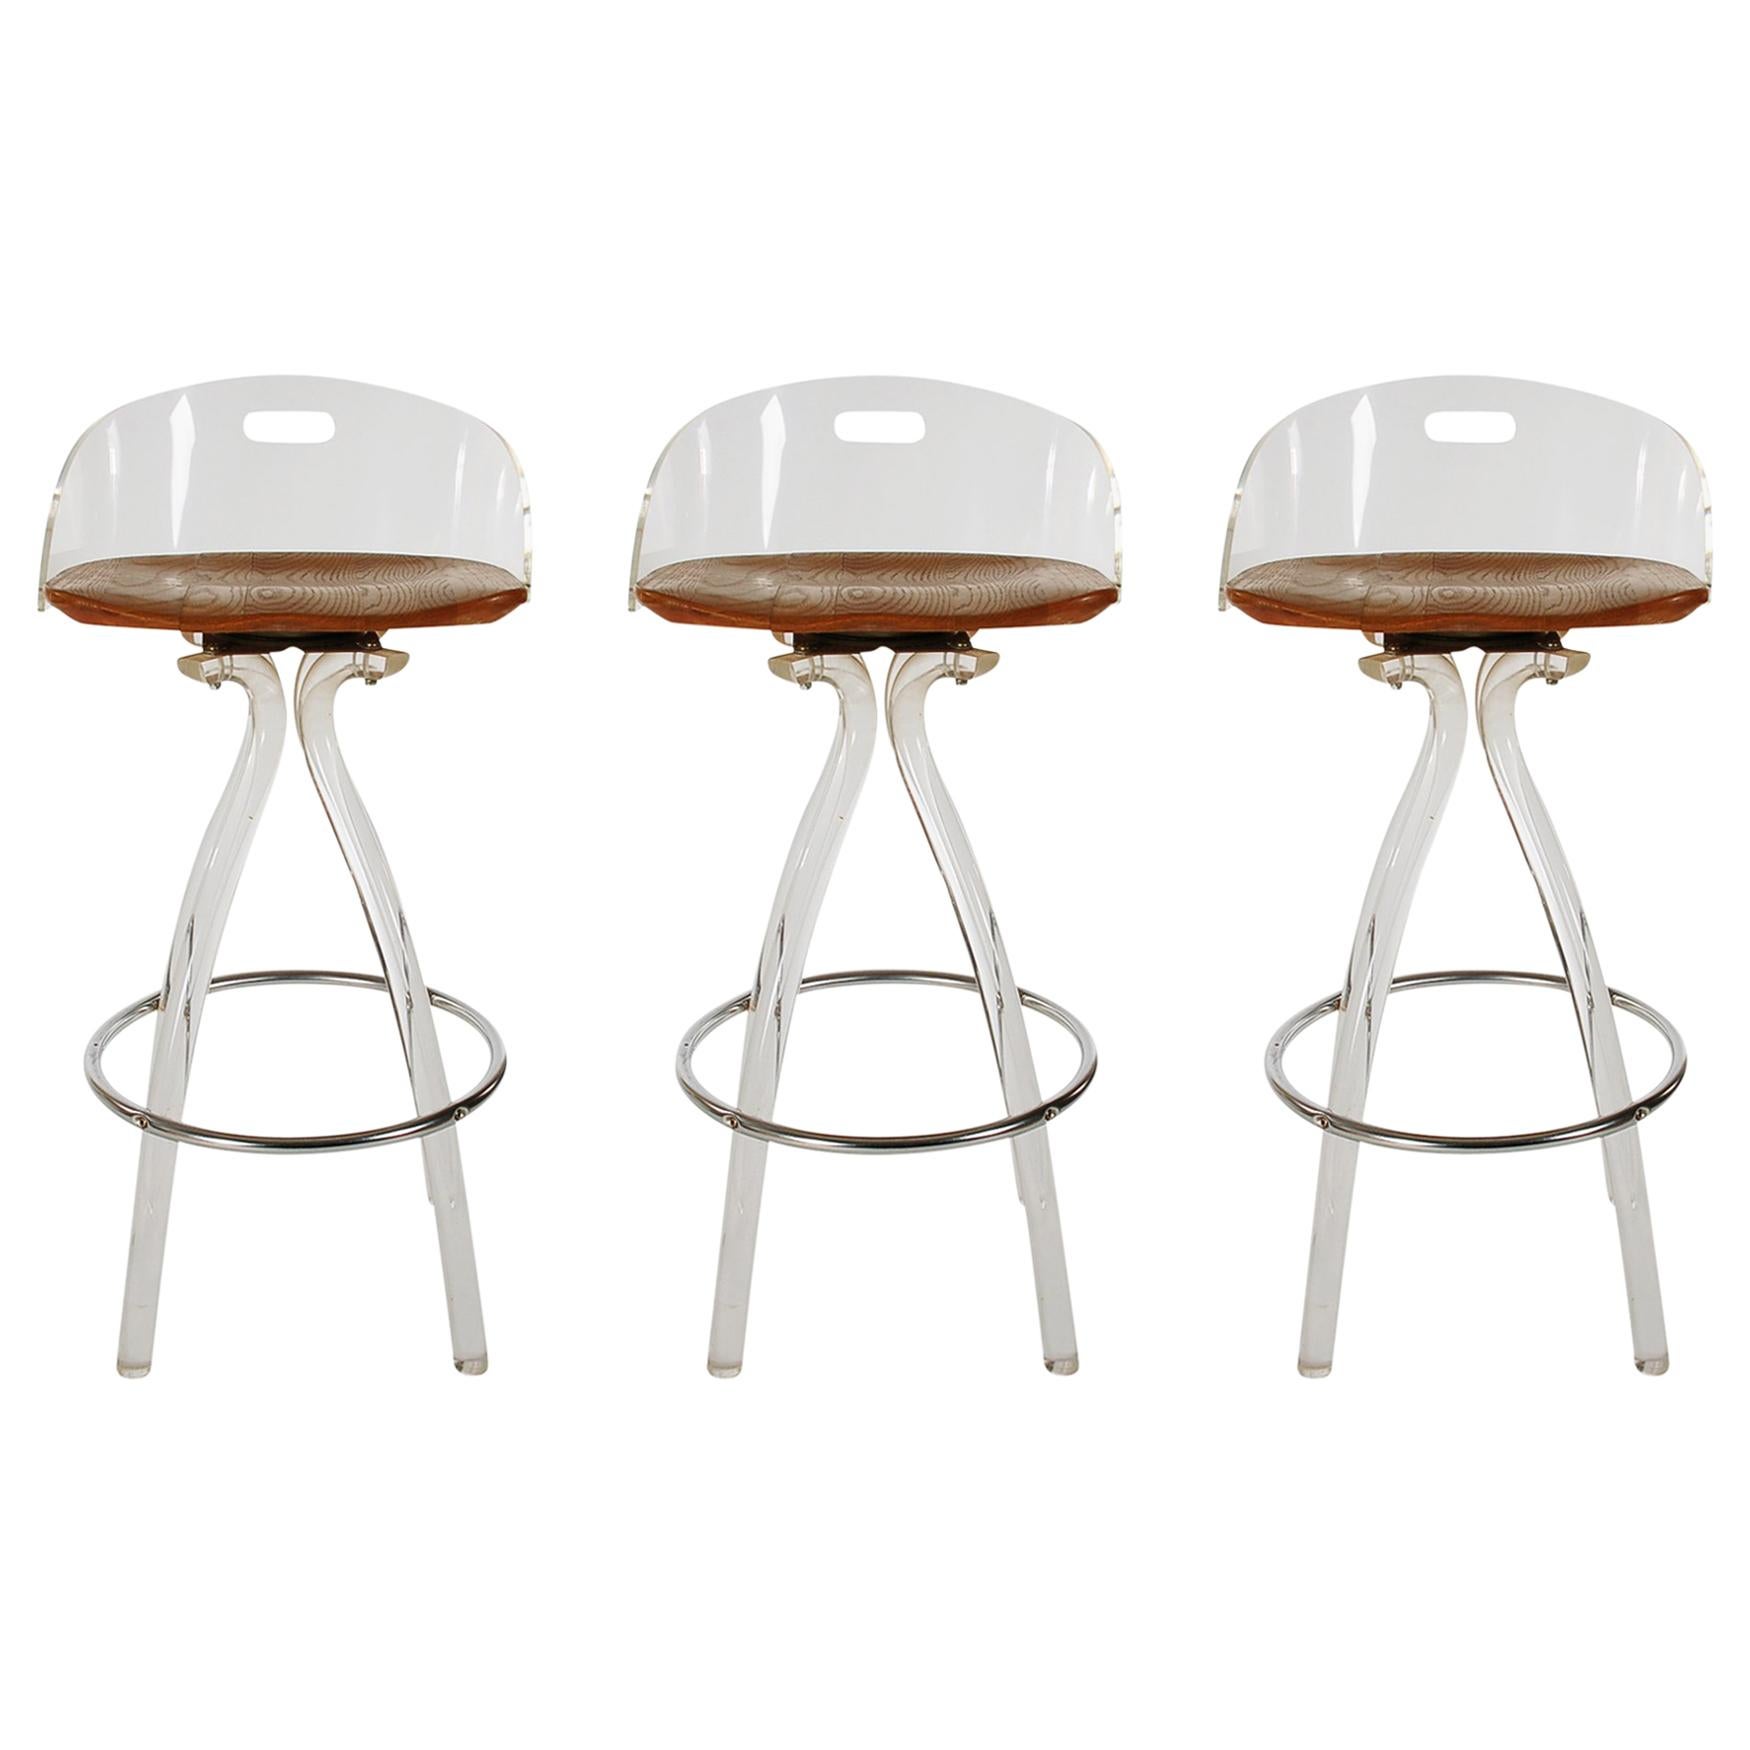 Mid-Century Modern Acrylic Lucite Counter Stools or Bar Stools by Hill Mfg.